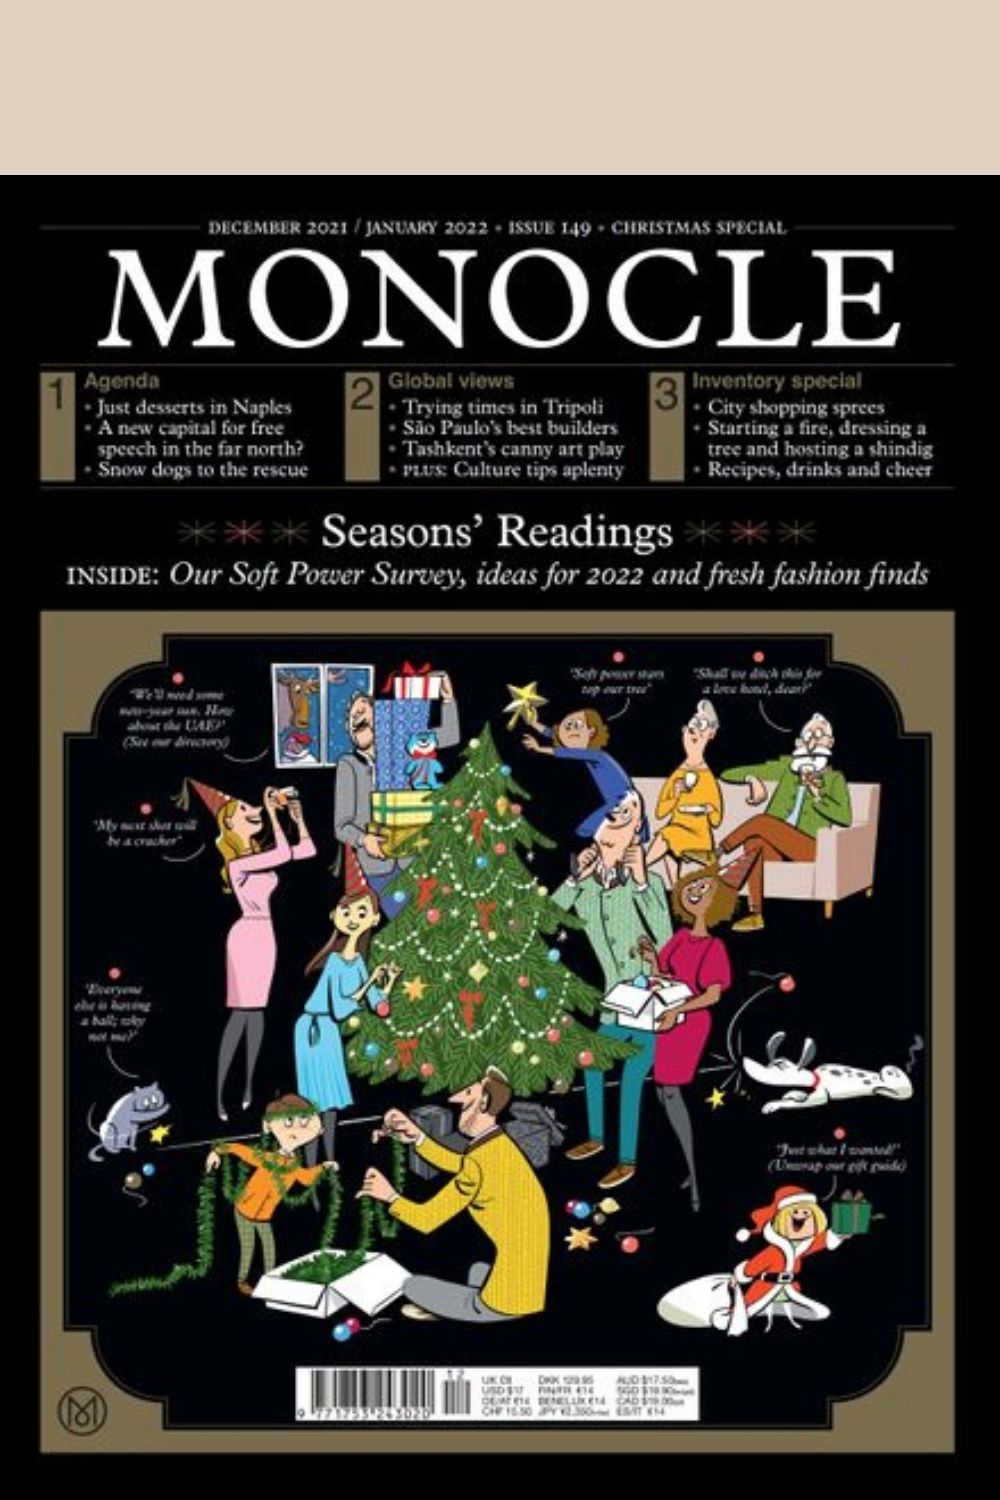 Monocle Issue 149 December 2021/January 2022